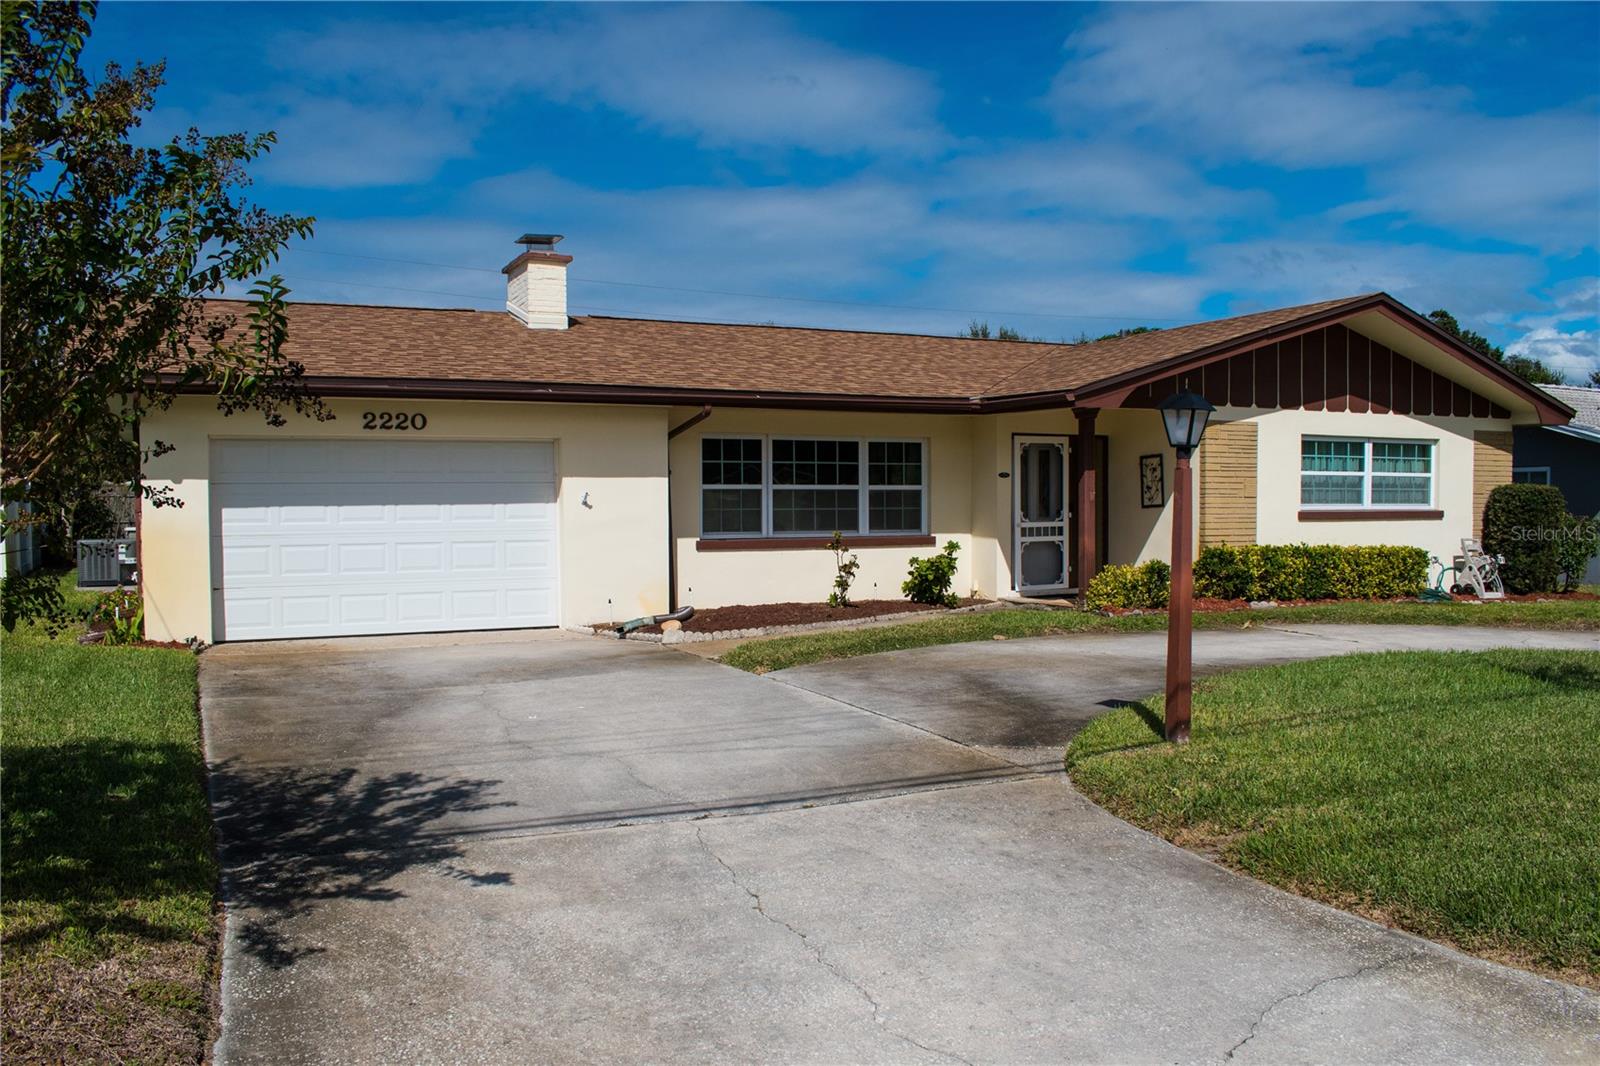 For sale: 2220 CURTIS DRIVE N, CLEARWATER FL 33764, CLEARWATER, FL